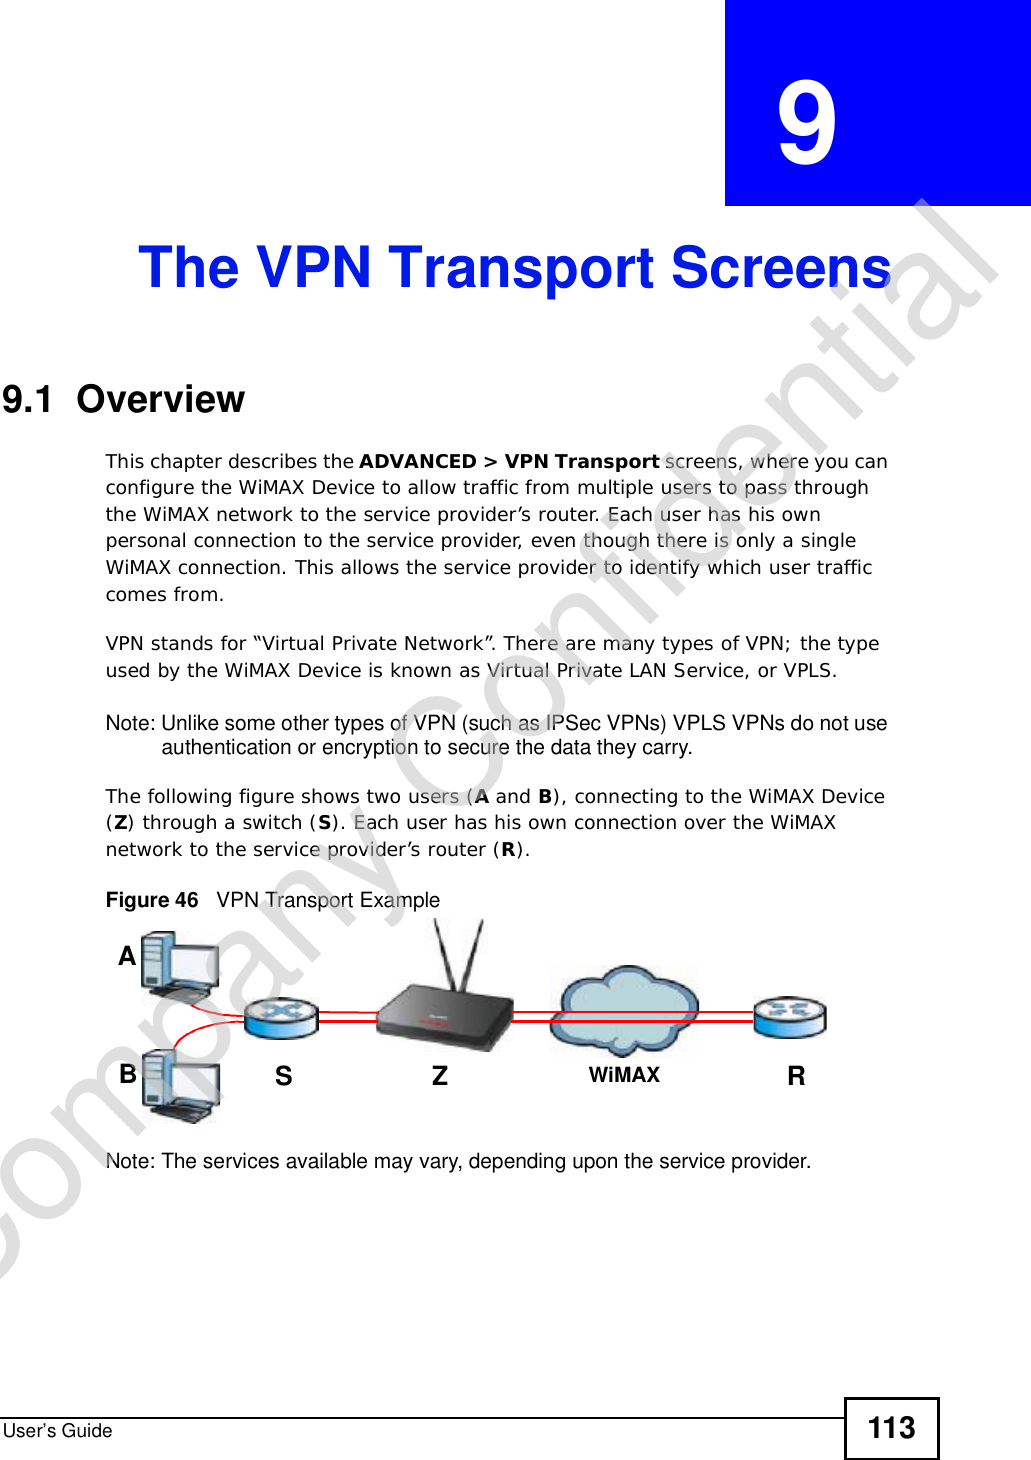 User’s Guide 113CHAPTER  9 The VPN Transport Screens9.1  OverviewThis chapter describes the ADVANCED &gt; VPN Transport screens, where you can configure the WiMAX Device to allow traffic from multiple users to pass through the WiMAX network to the service provider’s router. Each user has his own personal connection to the service provider, even though there is only a single WiMAX connection. This allows the service provider to identify which user traffic comes from.VPN stands for “Virtual Private Network”. There are many types of VPN; the type used by the WiMAX Device is known as Virtual Private LAN Service, or VPLS. Note: Unlike some other types of VPN (such as IPSec VPNs) VPLS VPNs do not use authentication or encryption to secure the data they carry. The following figure shows two users (A and B), connecting to the WiMAX Device (Z) through a switch (S). Each user has his own connection over the WiMAX network to the service provider’s router (R).Figure 46   VPN Transport ExampleNote: The services available may vary, depending upon the service provider.ABSZRWiMAXCompany Confidential